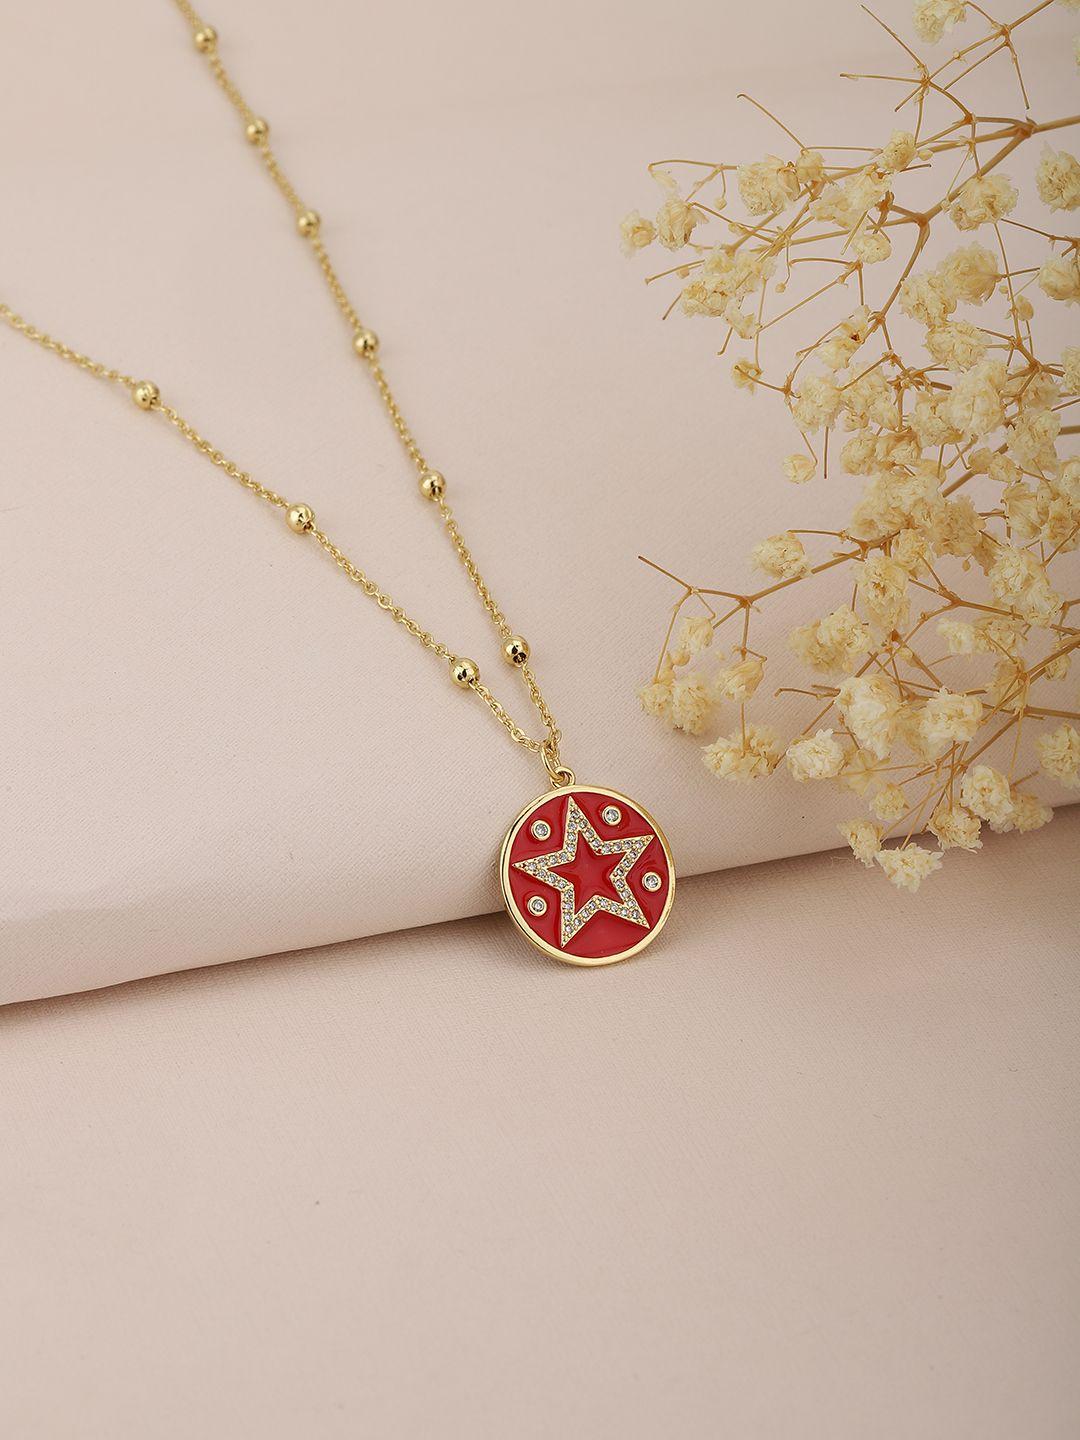 carlton-london-red-gold-plated-cz-studded-star-shaped-enamelled-necklace